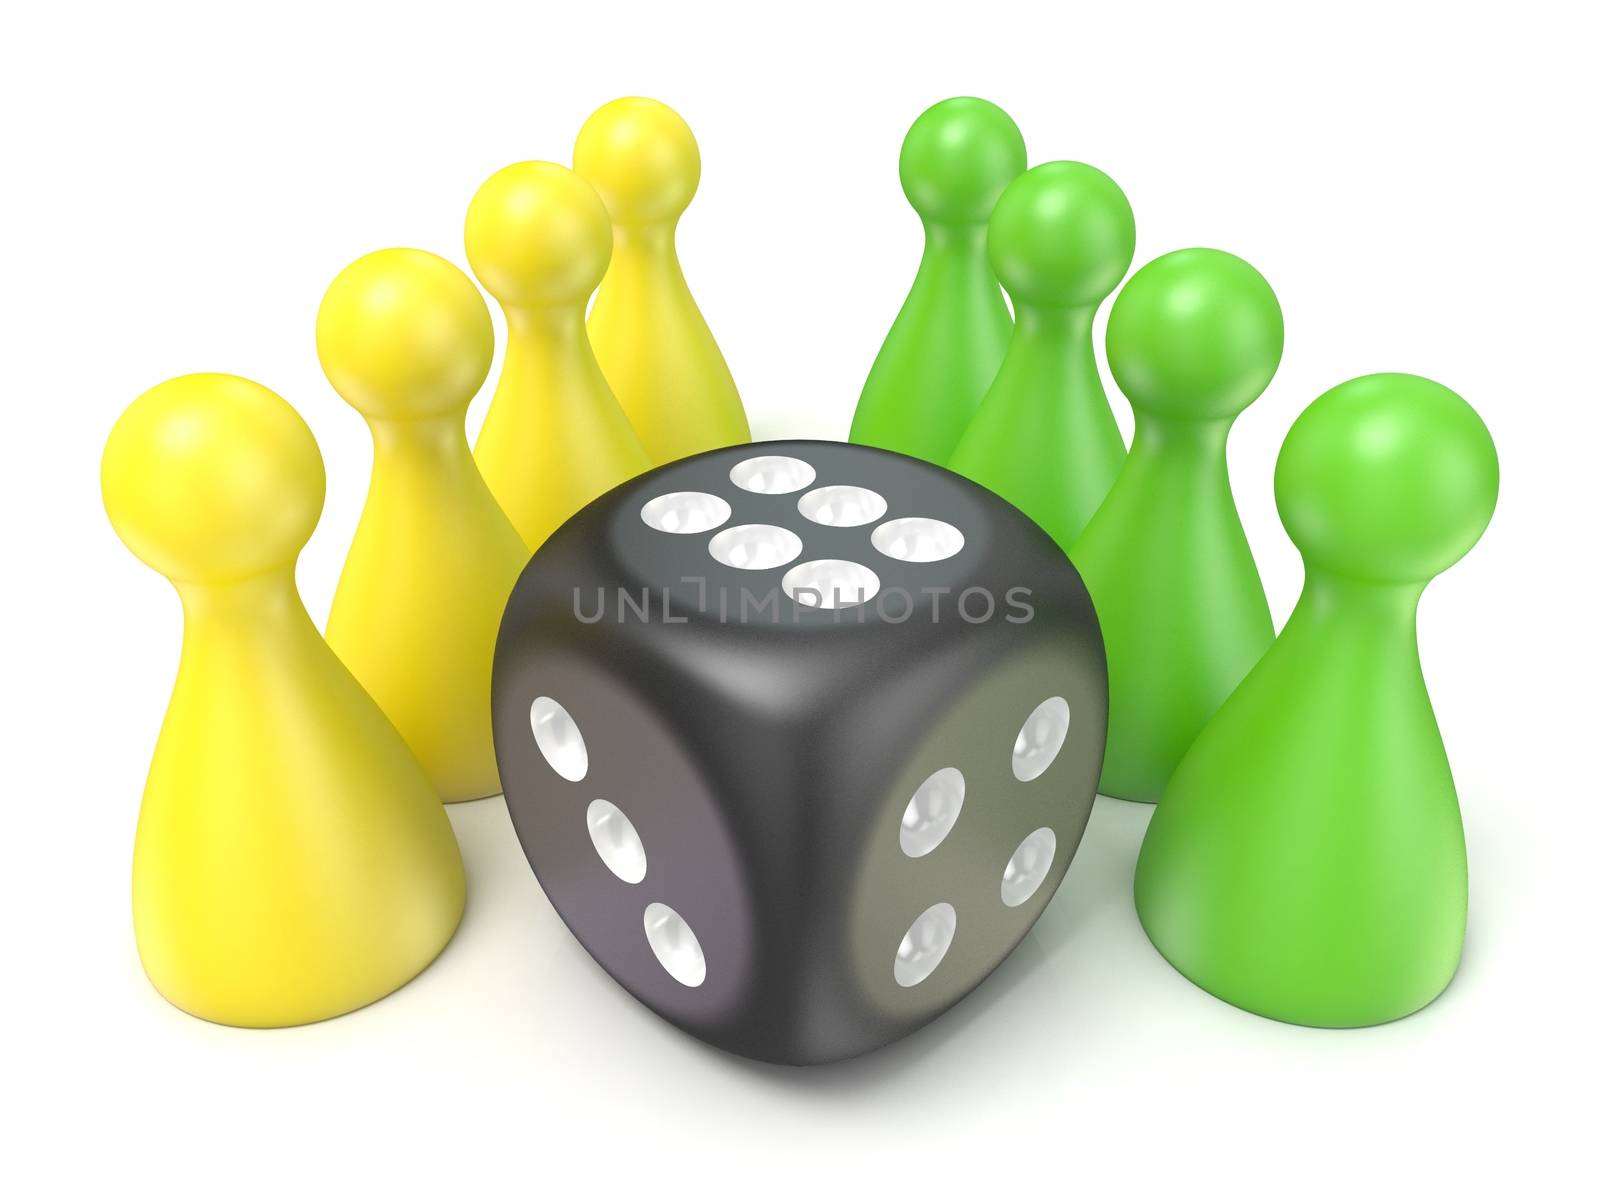 Conceptual game pawns and black dice. 3D render illustration isolated on white background